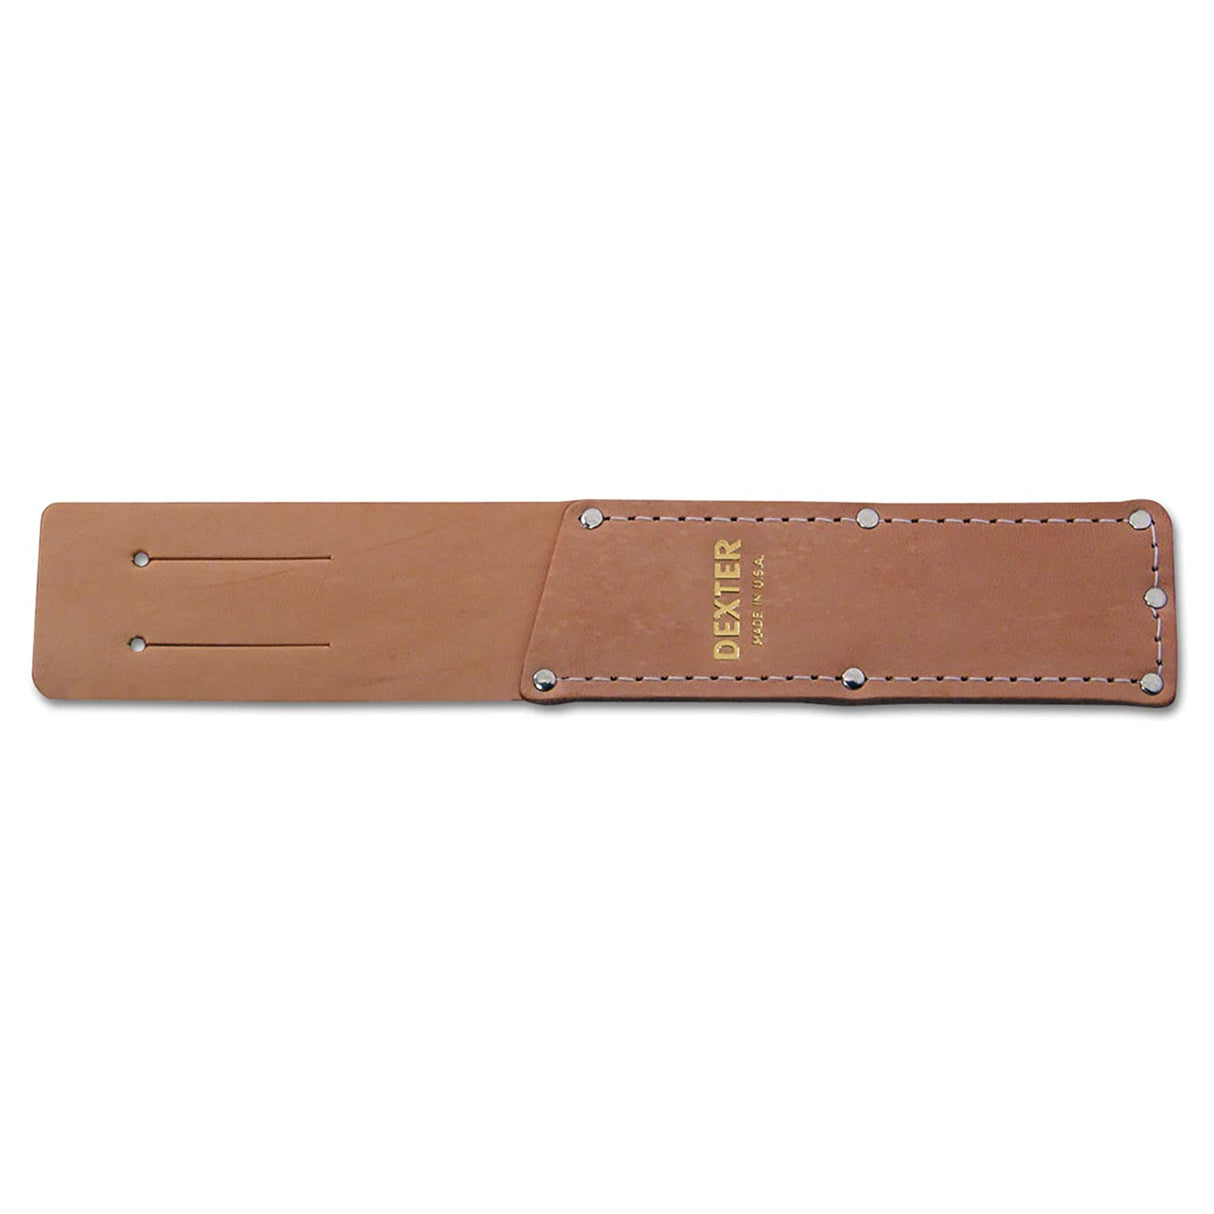 Dexter Leather Sheath  6" Produce Knives  Leather  Brown